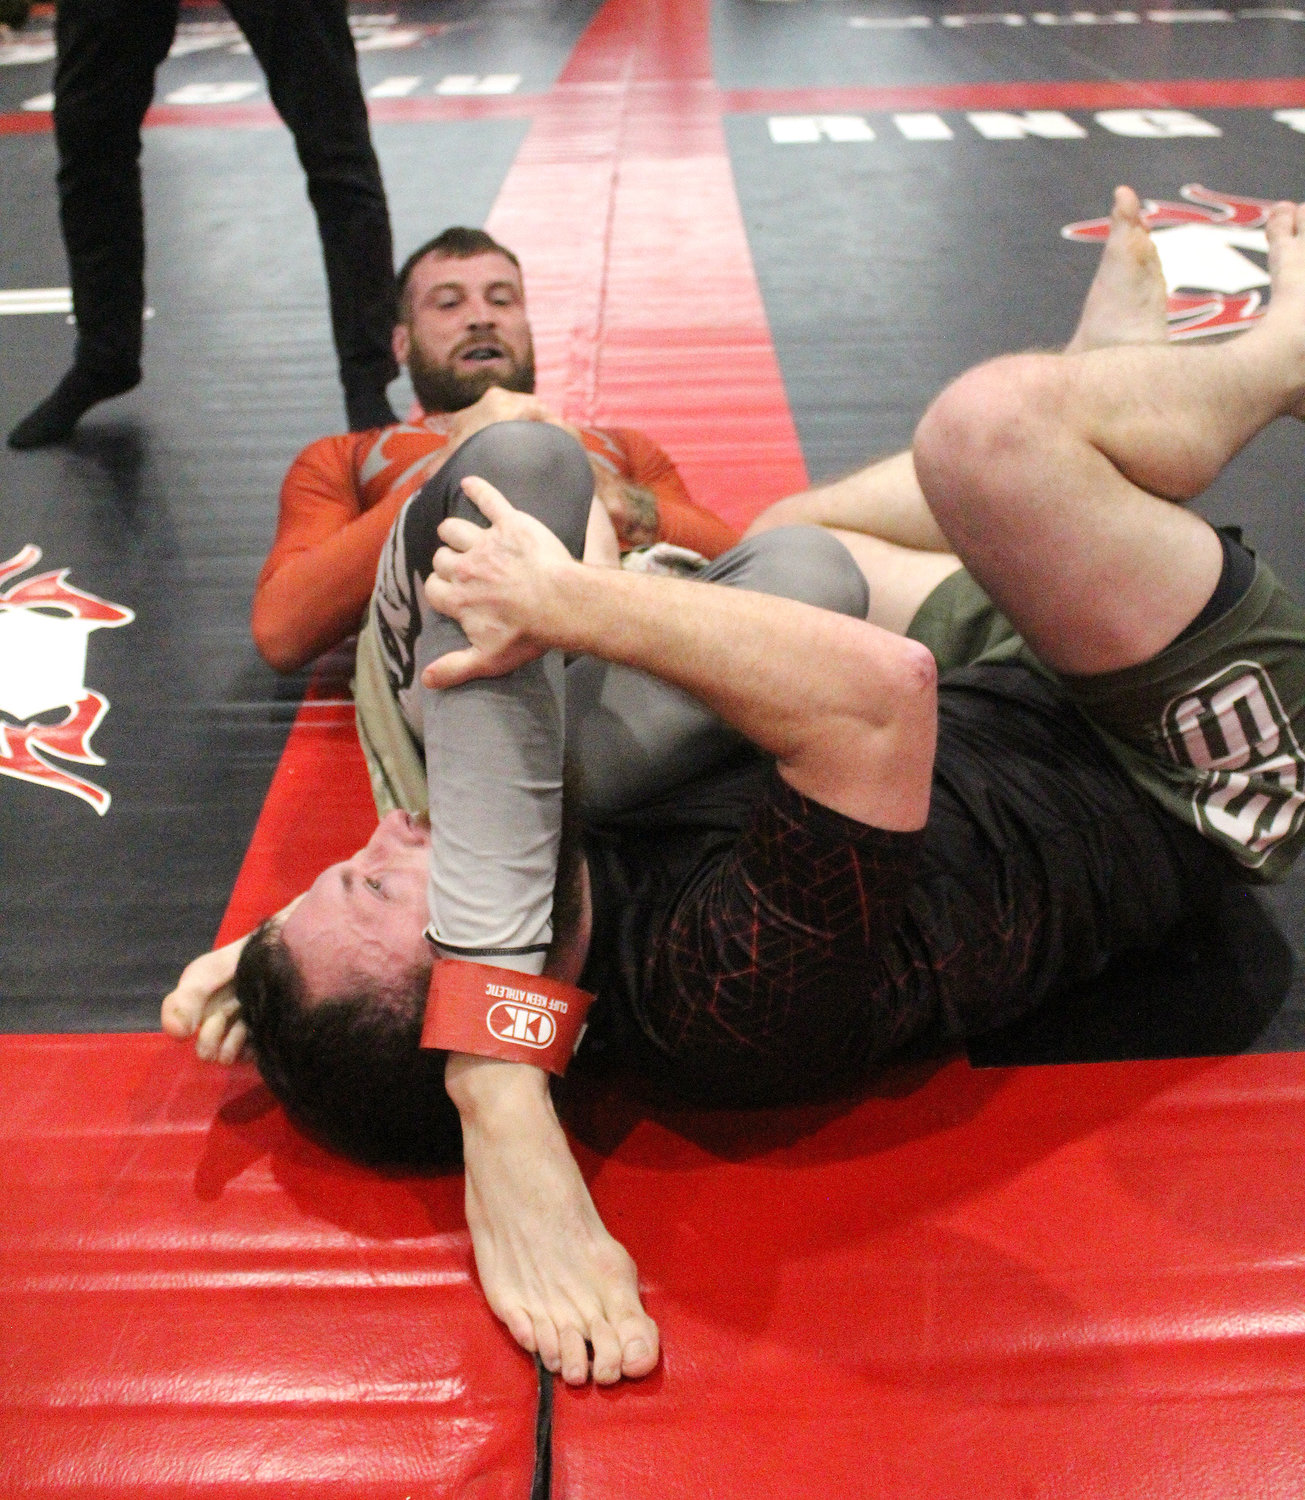 Ryan George earns a submission win over Daniel Simmons Saturday afternoon at the Foley Sports Tourism Complex during the North American Grappling Association’s U.S. Nationals. George went on to win the beginner lightweight division.